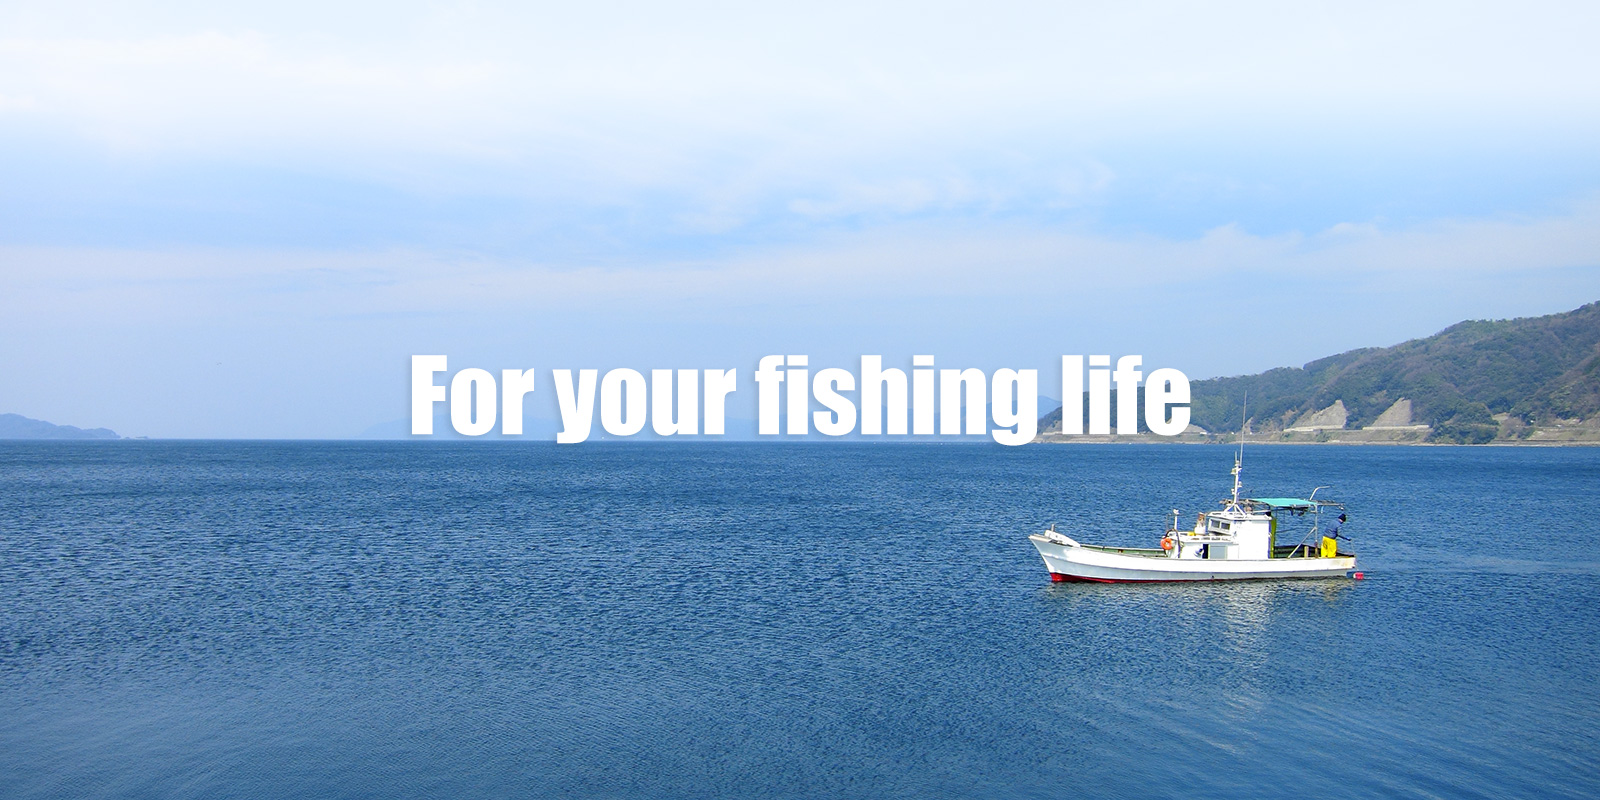 For your fishing life